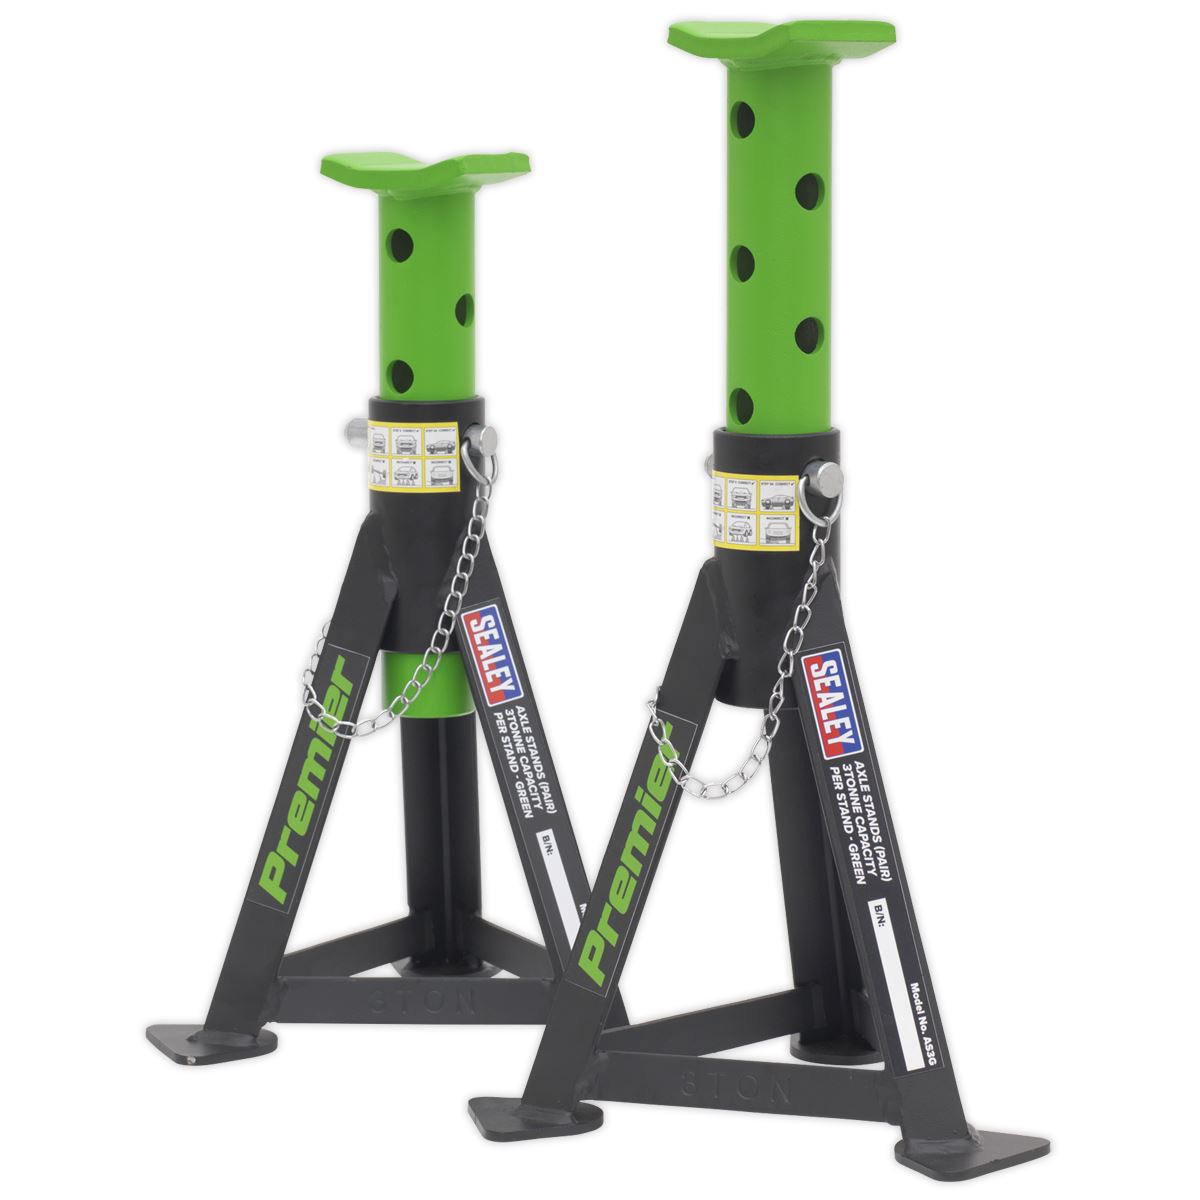 Sealey Premier Premier Axle Stands (Pair) 3 Tonne Capacity per Stand - Green